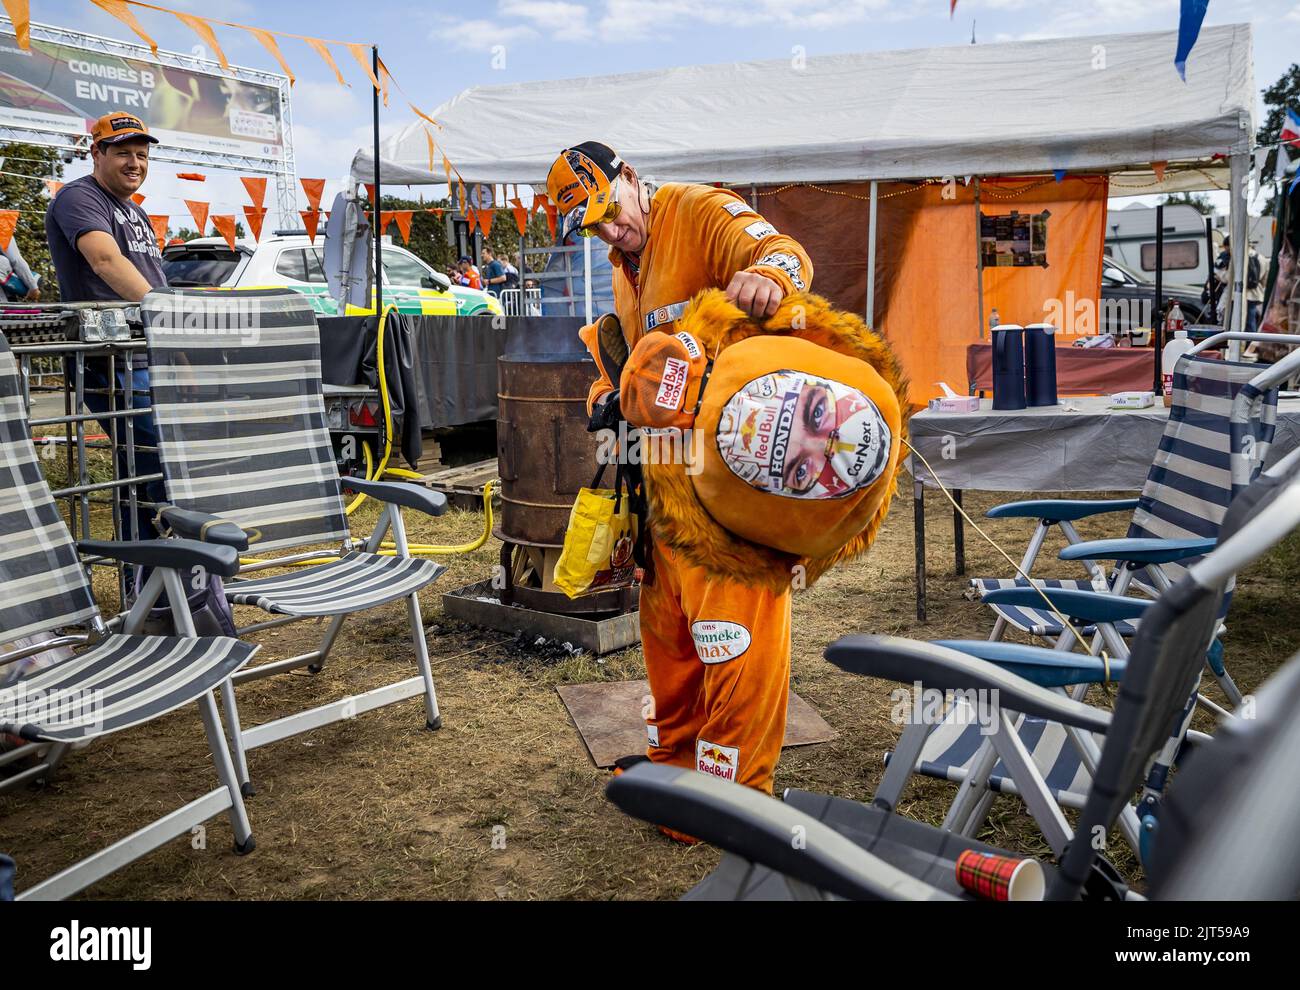 SPA - A fan of Max Verstappen prepares at the campsite leading up to the F1 Grand Prix of Belgium at the Spa-Francorchamps circuit on August 29, 2022 in Spa, Belgium. REMKO DE WAAL Stock Photo